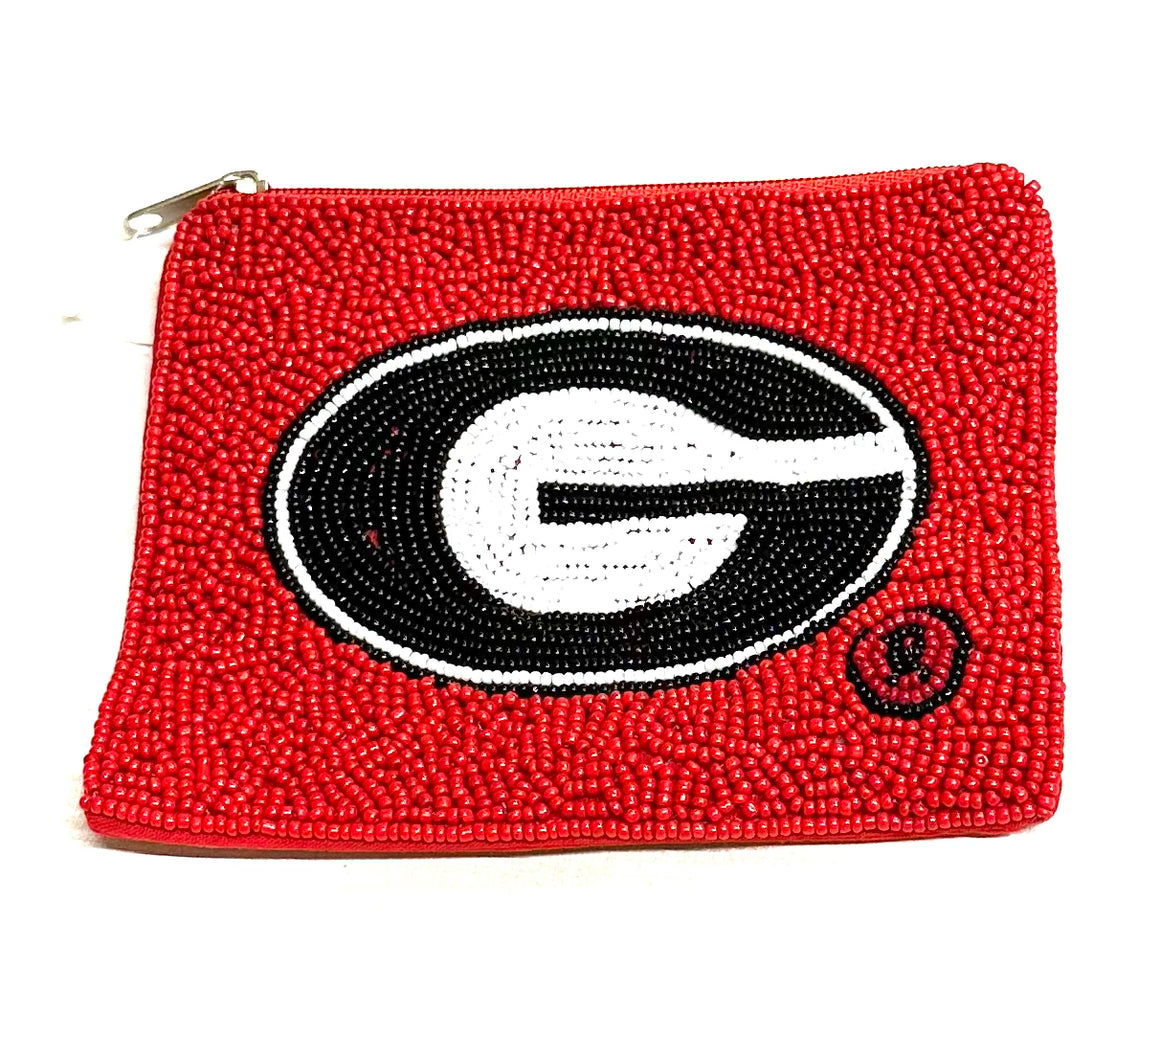 UNIVERSITY OF GEORGIA BEADED COIN POUCH